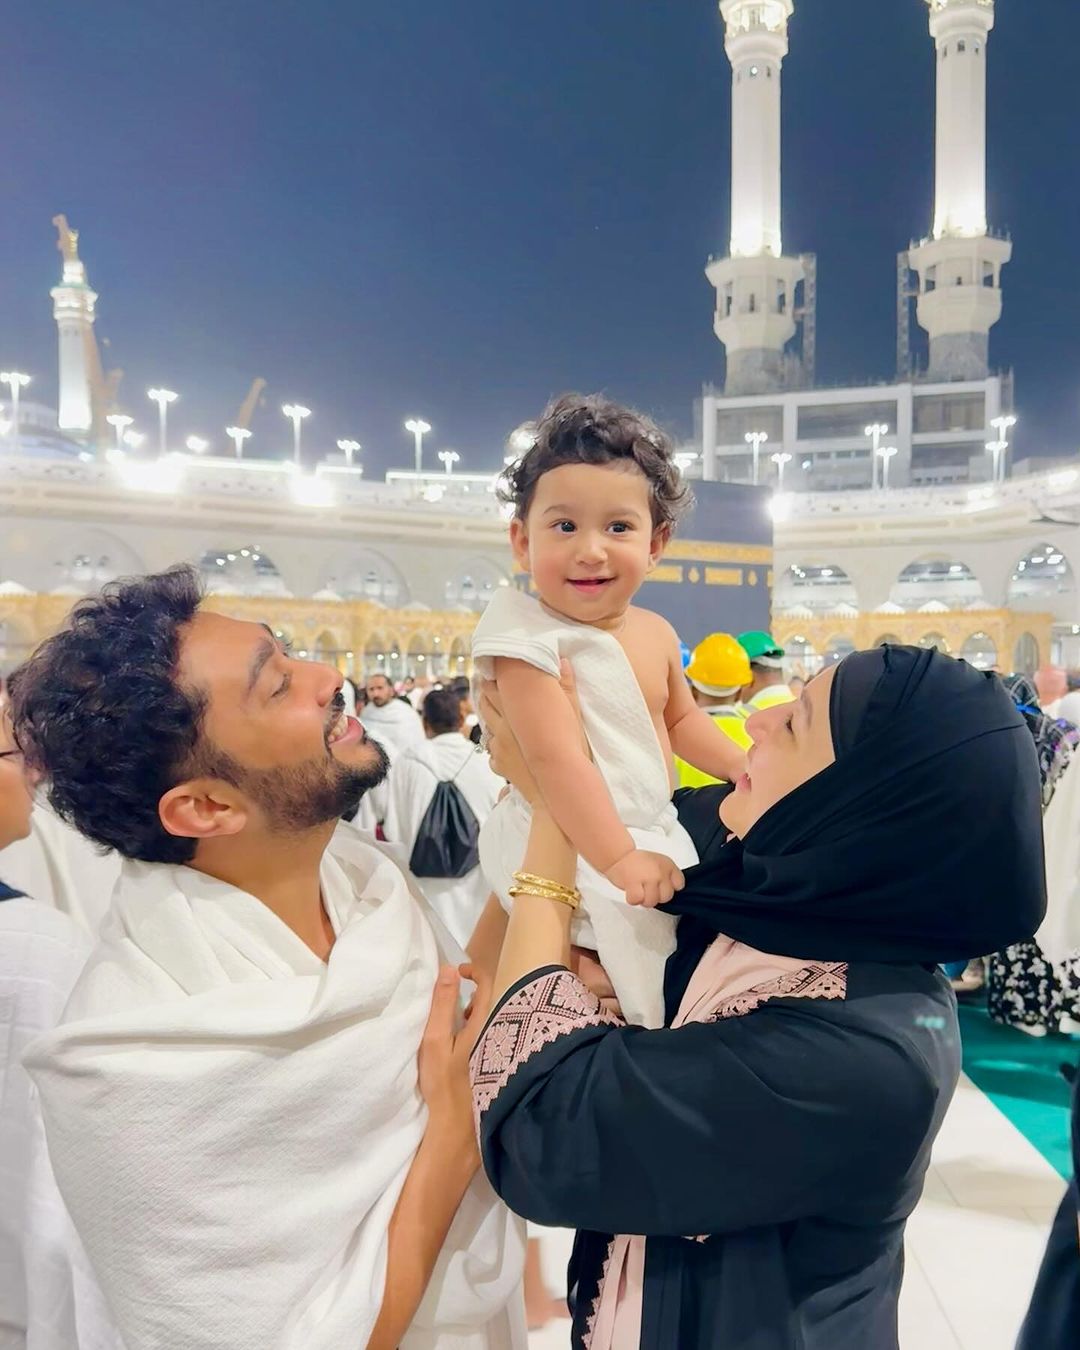 First Salaam To The World! Finally Gauahar Khan And Zaid Darbar Reveal Their Little Prince Face On Umrah Trip!